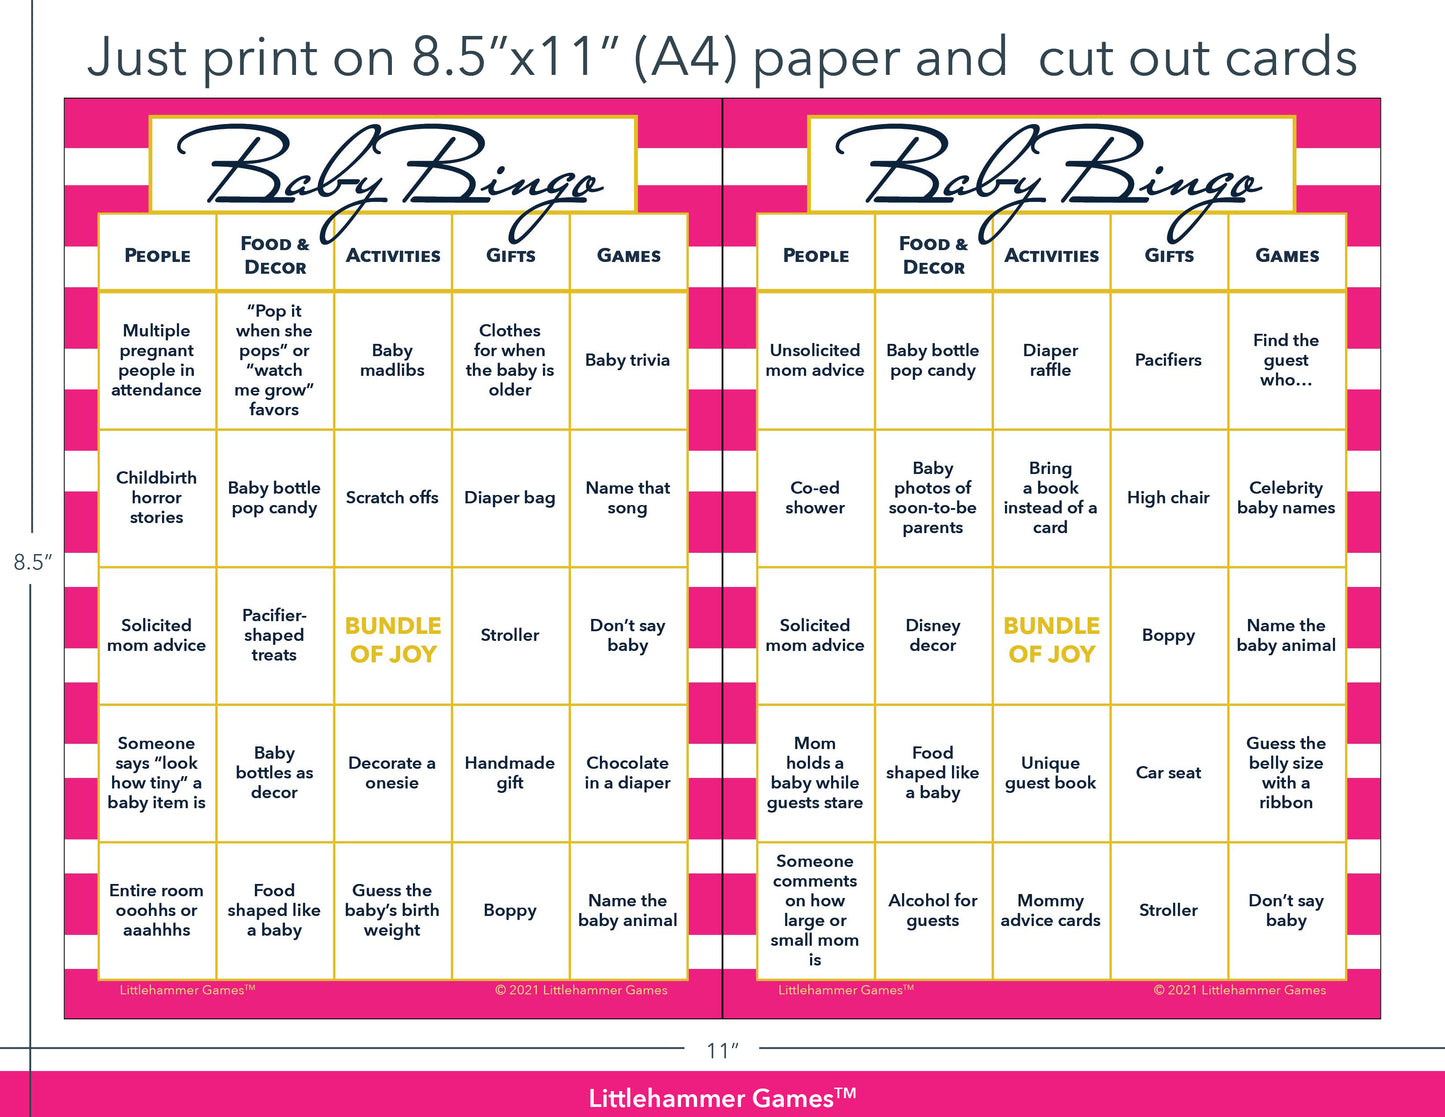 Pink-striped Baby Bingo game cards with printing instructions